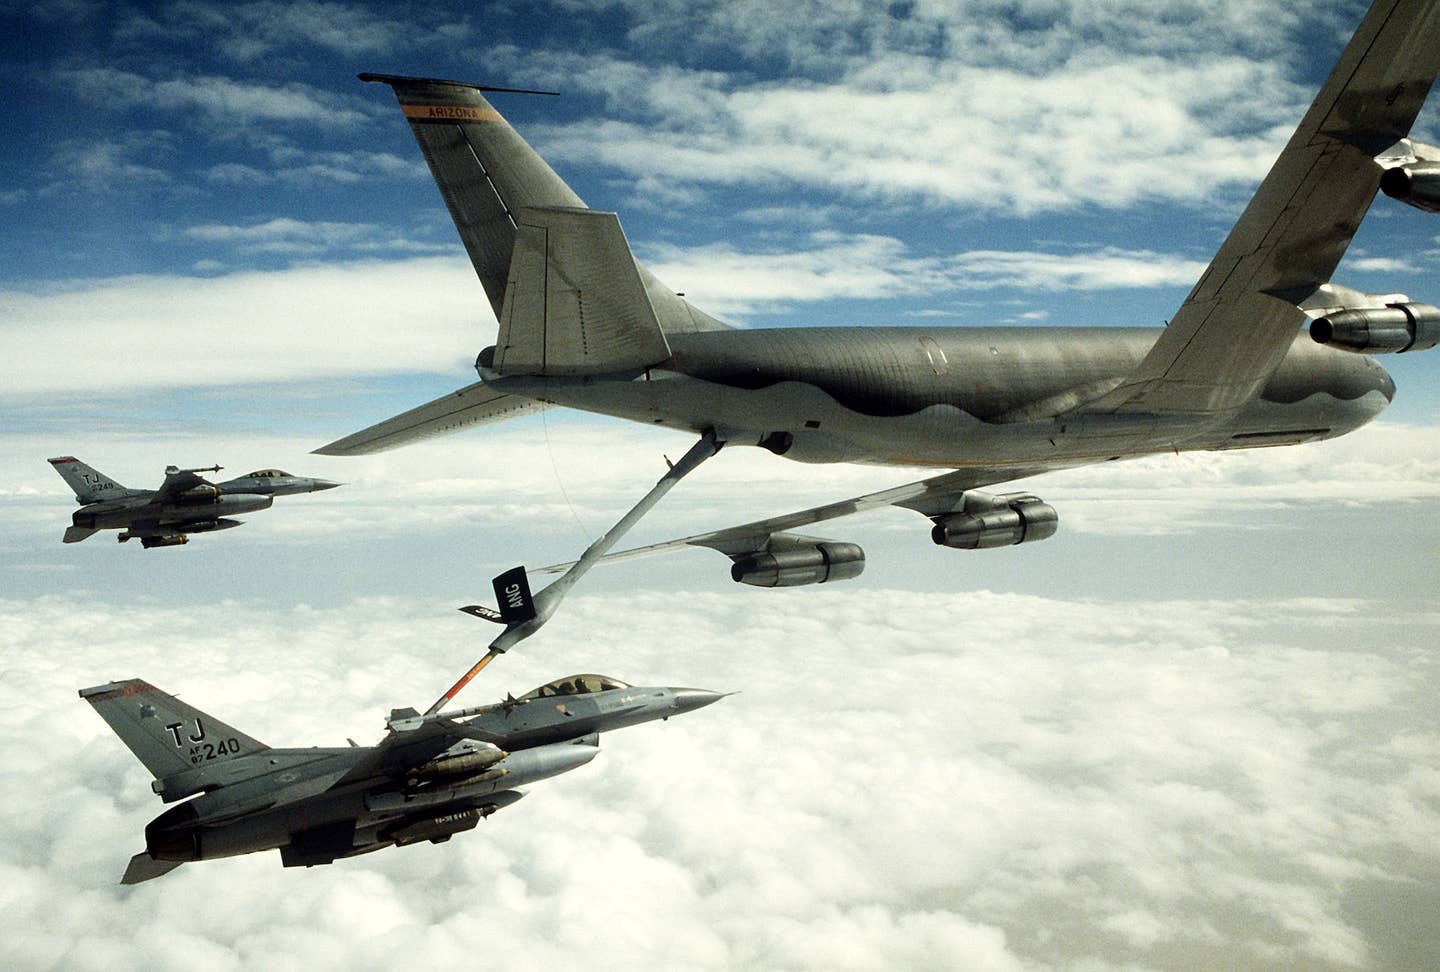 A 401st Tactical Fighter Wing F-16C refuels from a KC-135 Stratotanker as another F-16 stands by during Operation Desert Storm, February 1, 1991. <em>USAF image by Staff Sgt. Lee F. Corkran</em>